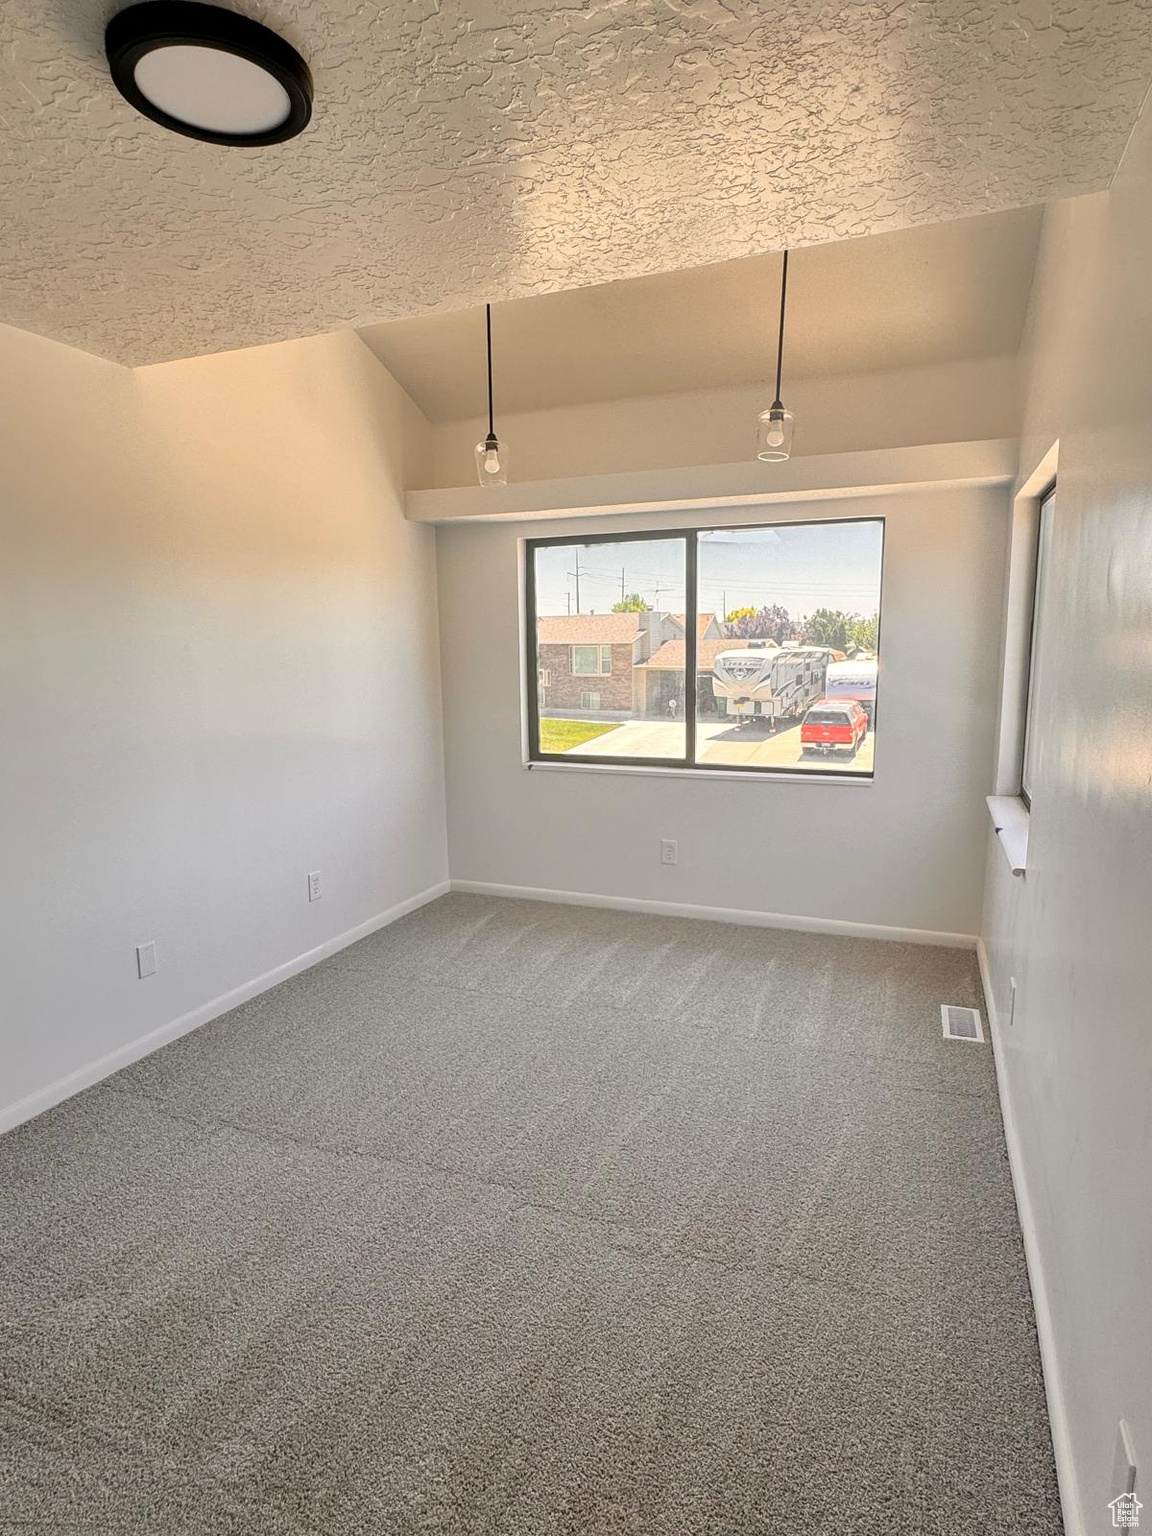 Unfurnished room featuring carpet floors and a textured ceiling